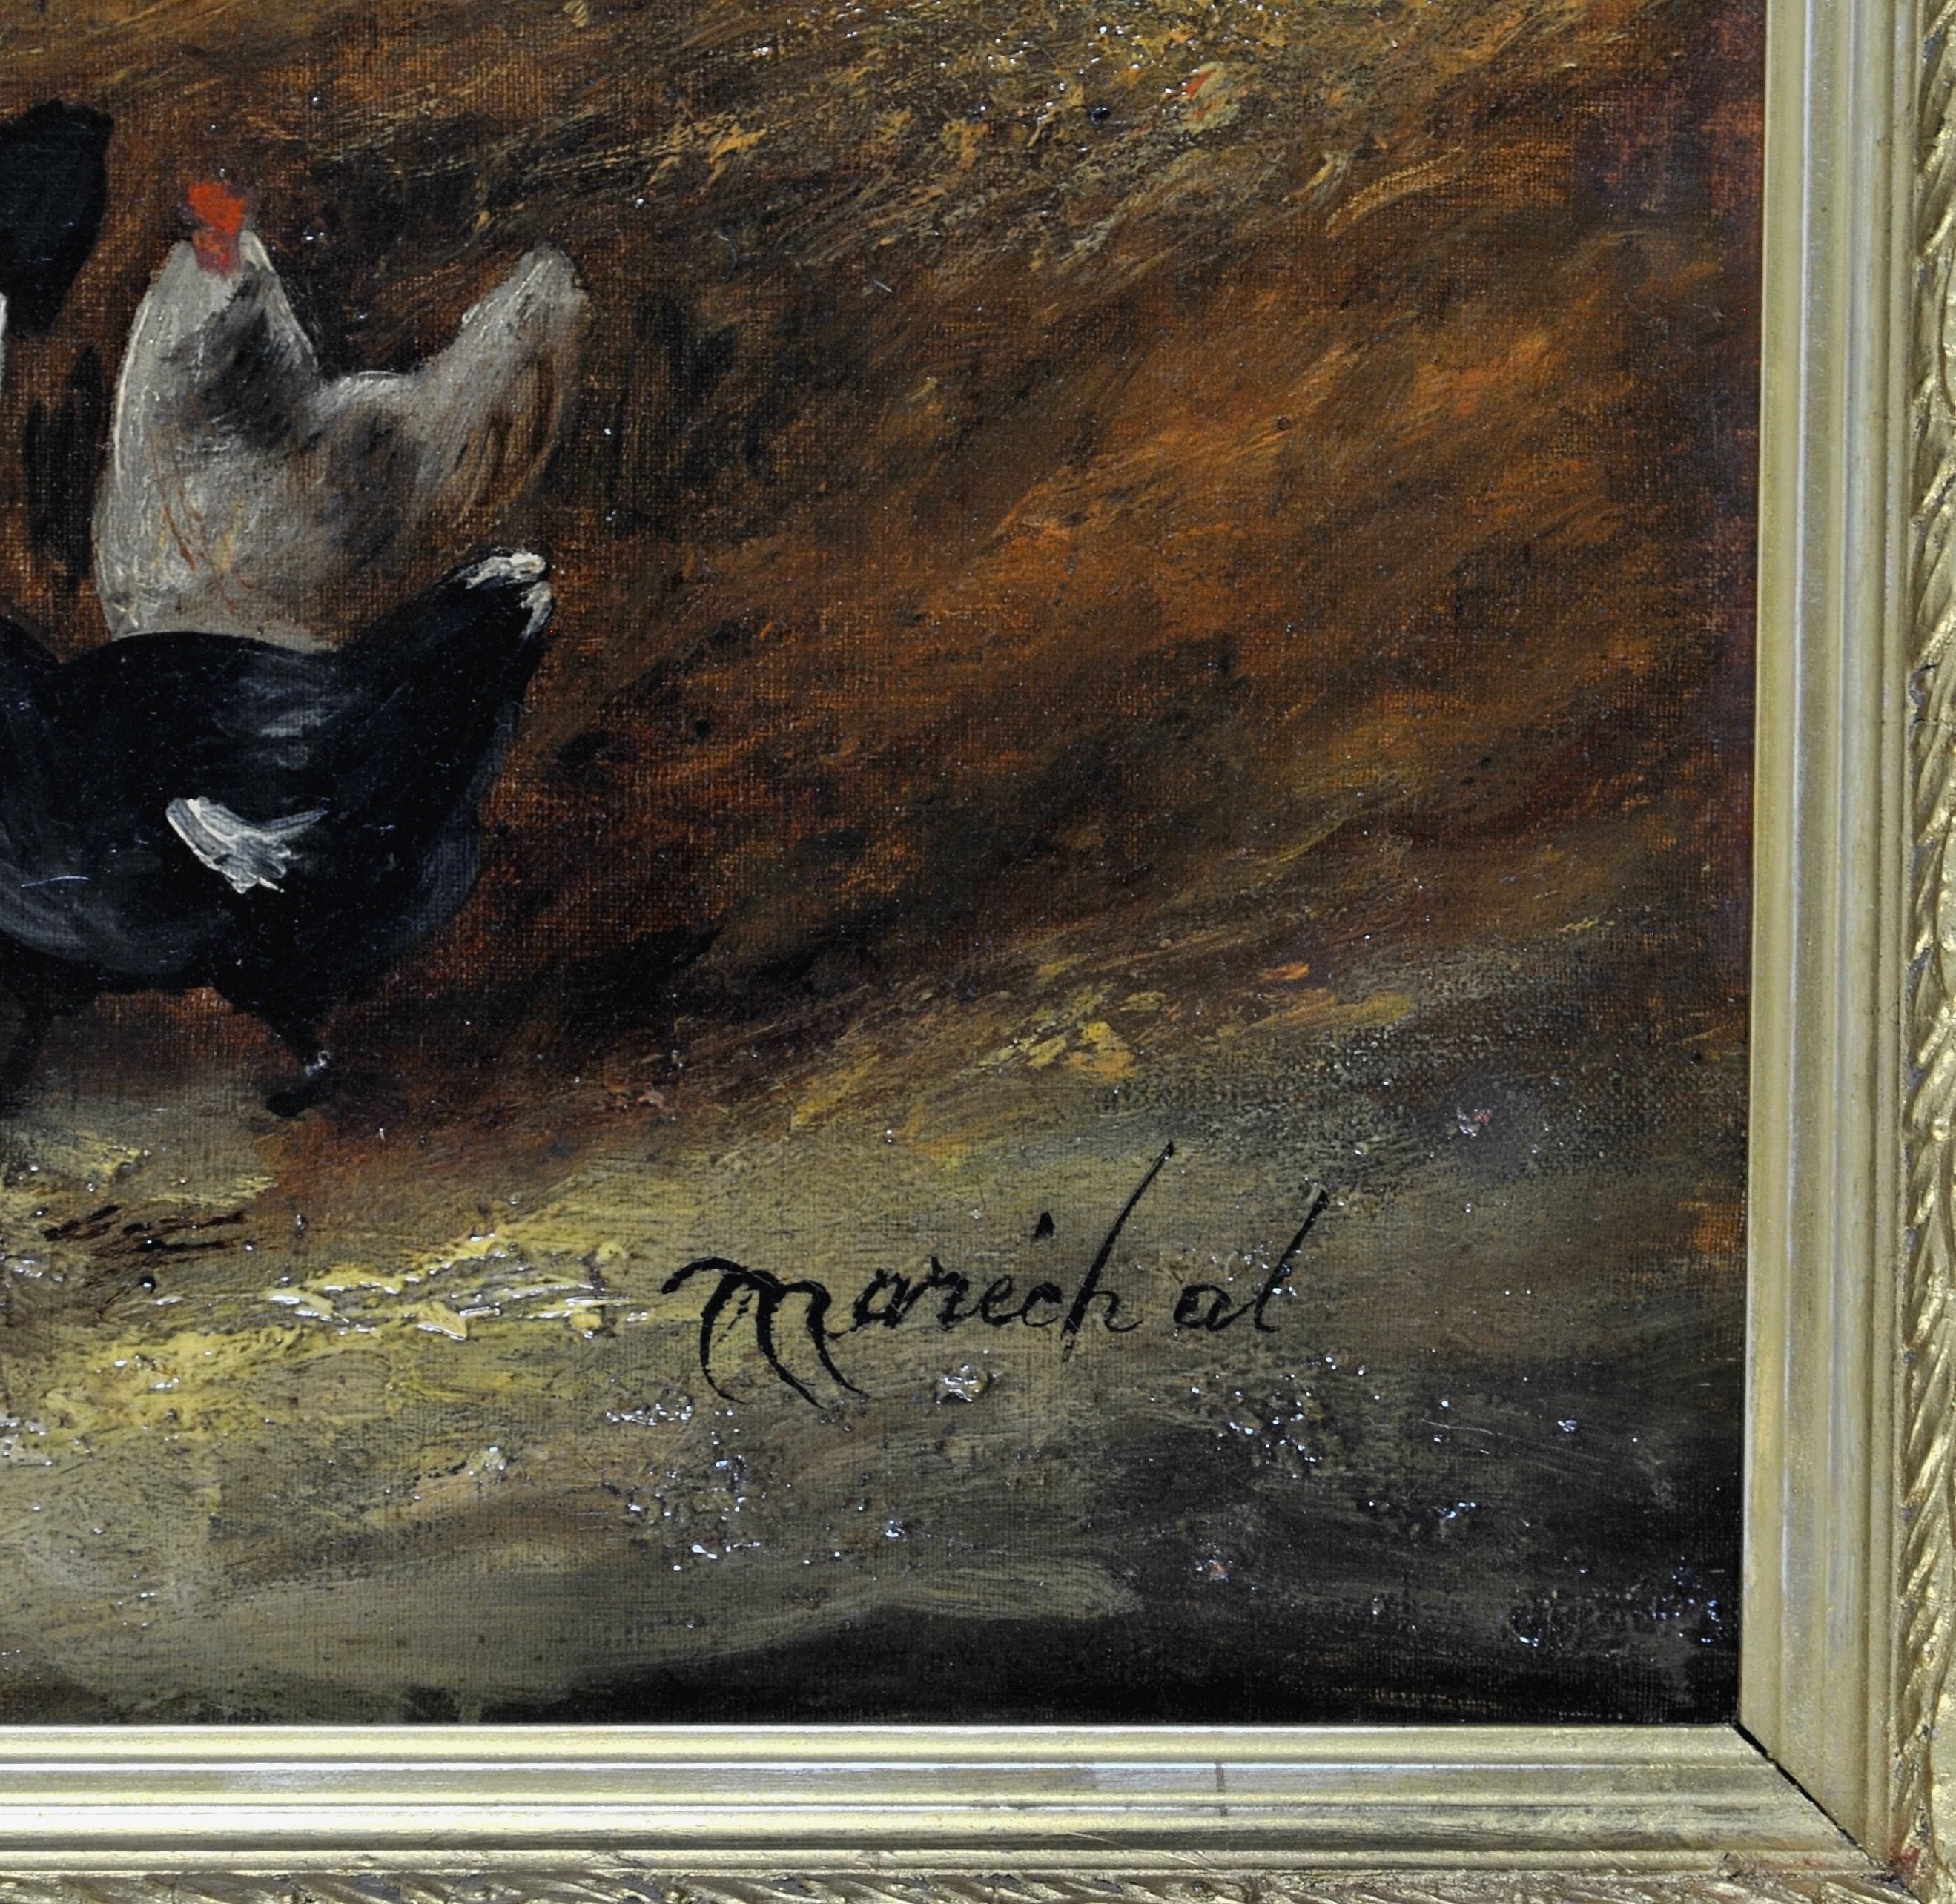 Fine large 19th century French oil on canvas depicting chickens in a farmyard, by Charles Marechal. Excellent quality work, presented in its original oak frame with gilded gesso decoration. Signed lower right.

Artist: Charles Marechal (French,